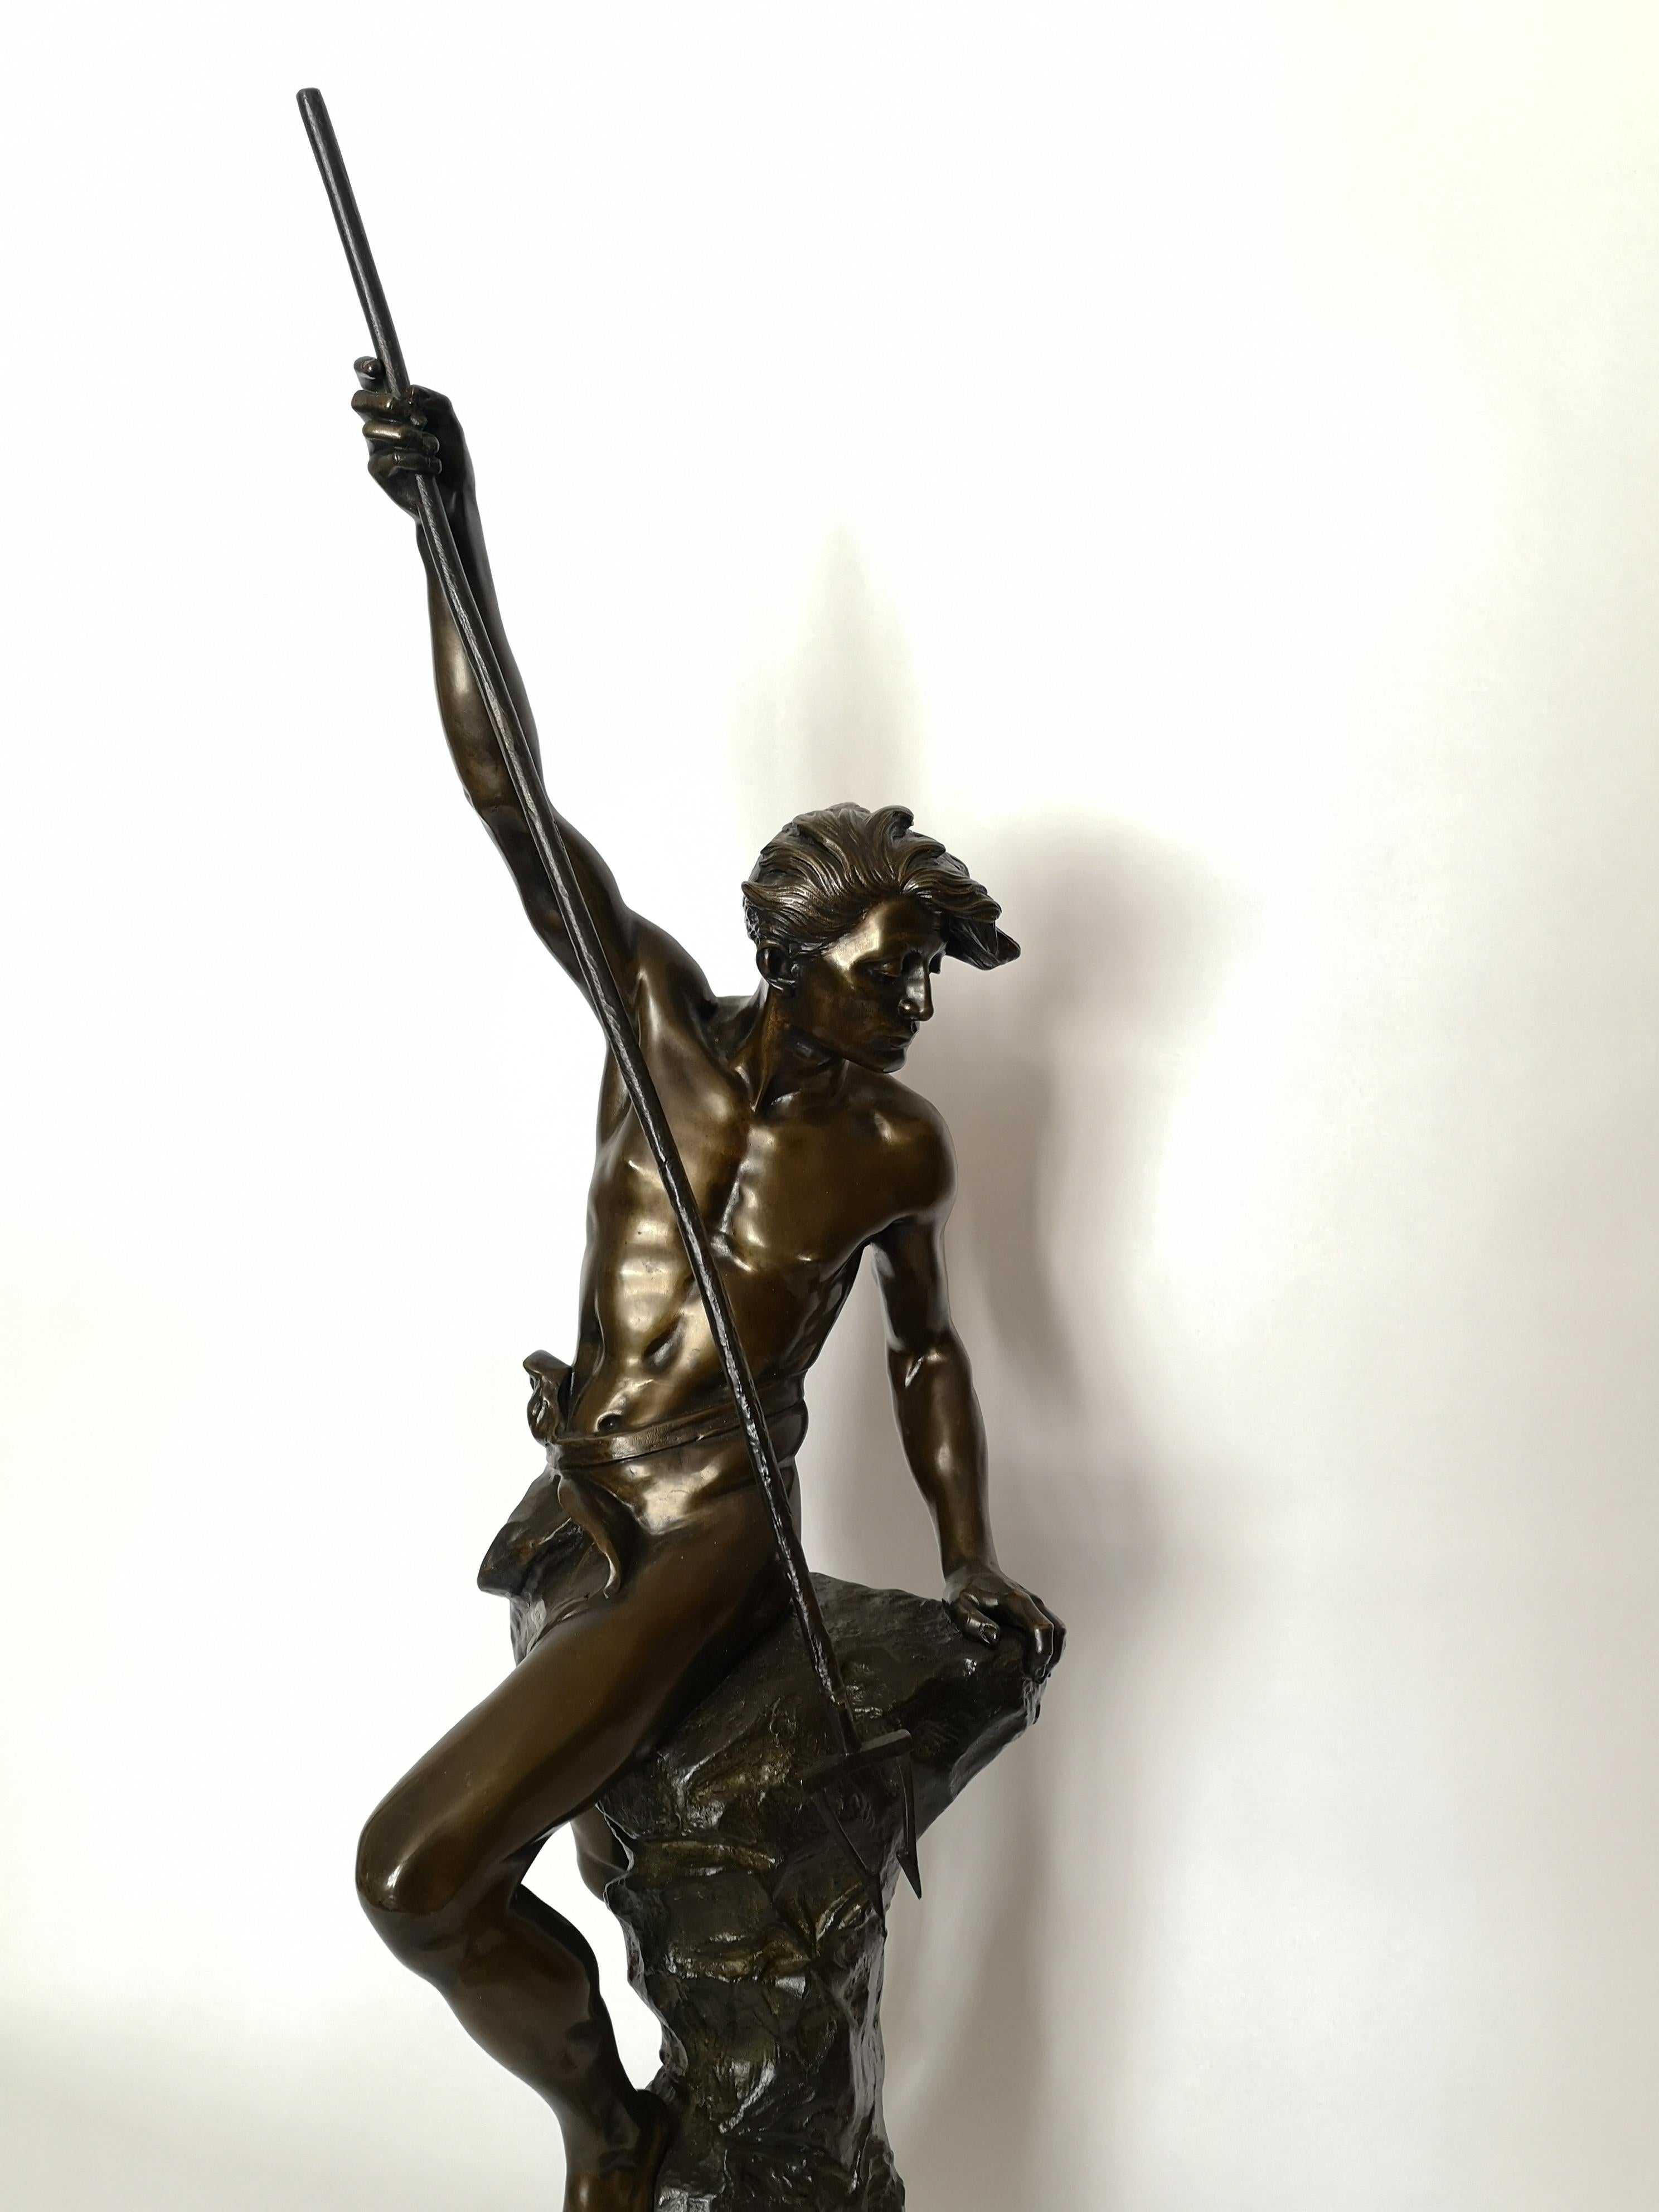 A late 19th century bronze of a fisherman with a harpoon, he is sitting on a rock with waves crashing at the base.
Ernest Justin Ferrand was a French artist who was active in the 19th century and the first half of the 20th century. He regularly